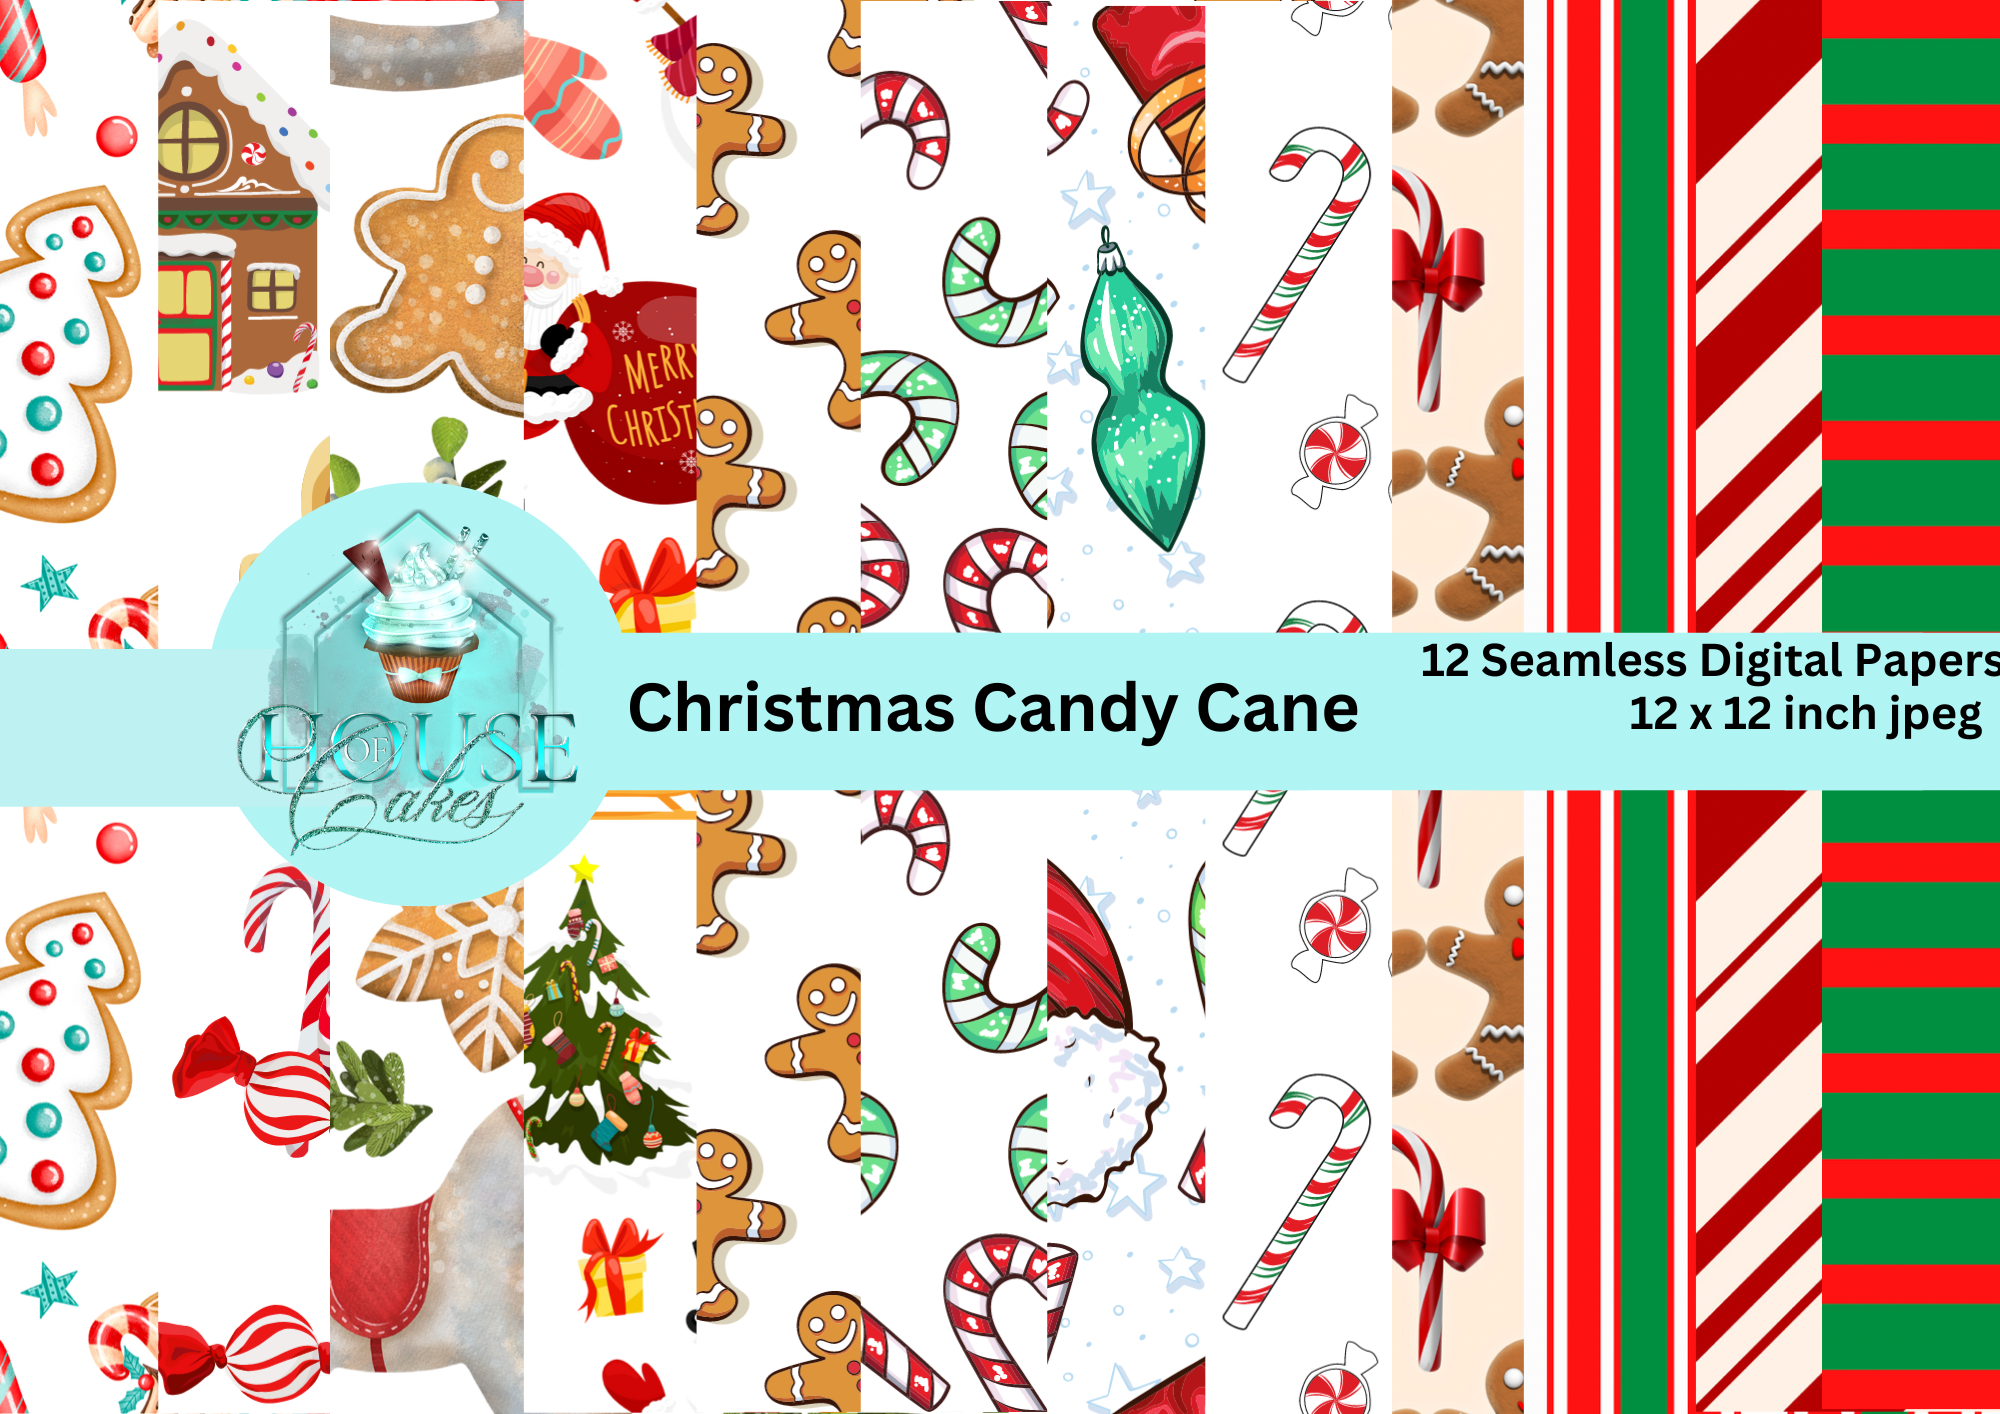 12 Christmas Candy Cane Themed Seamless Digital Paper